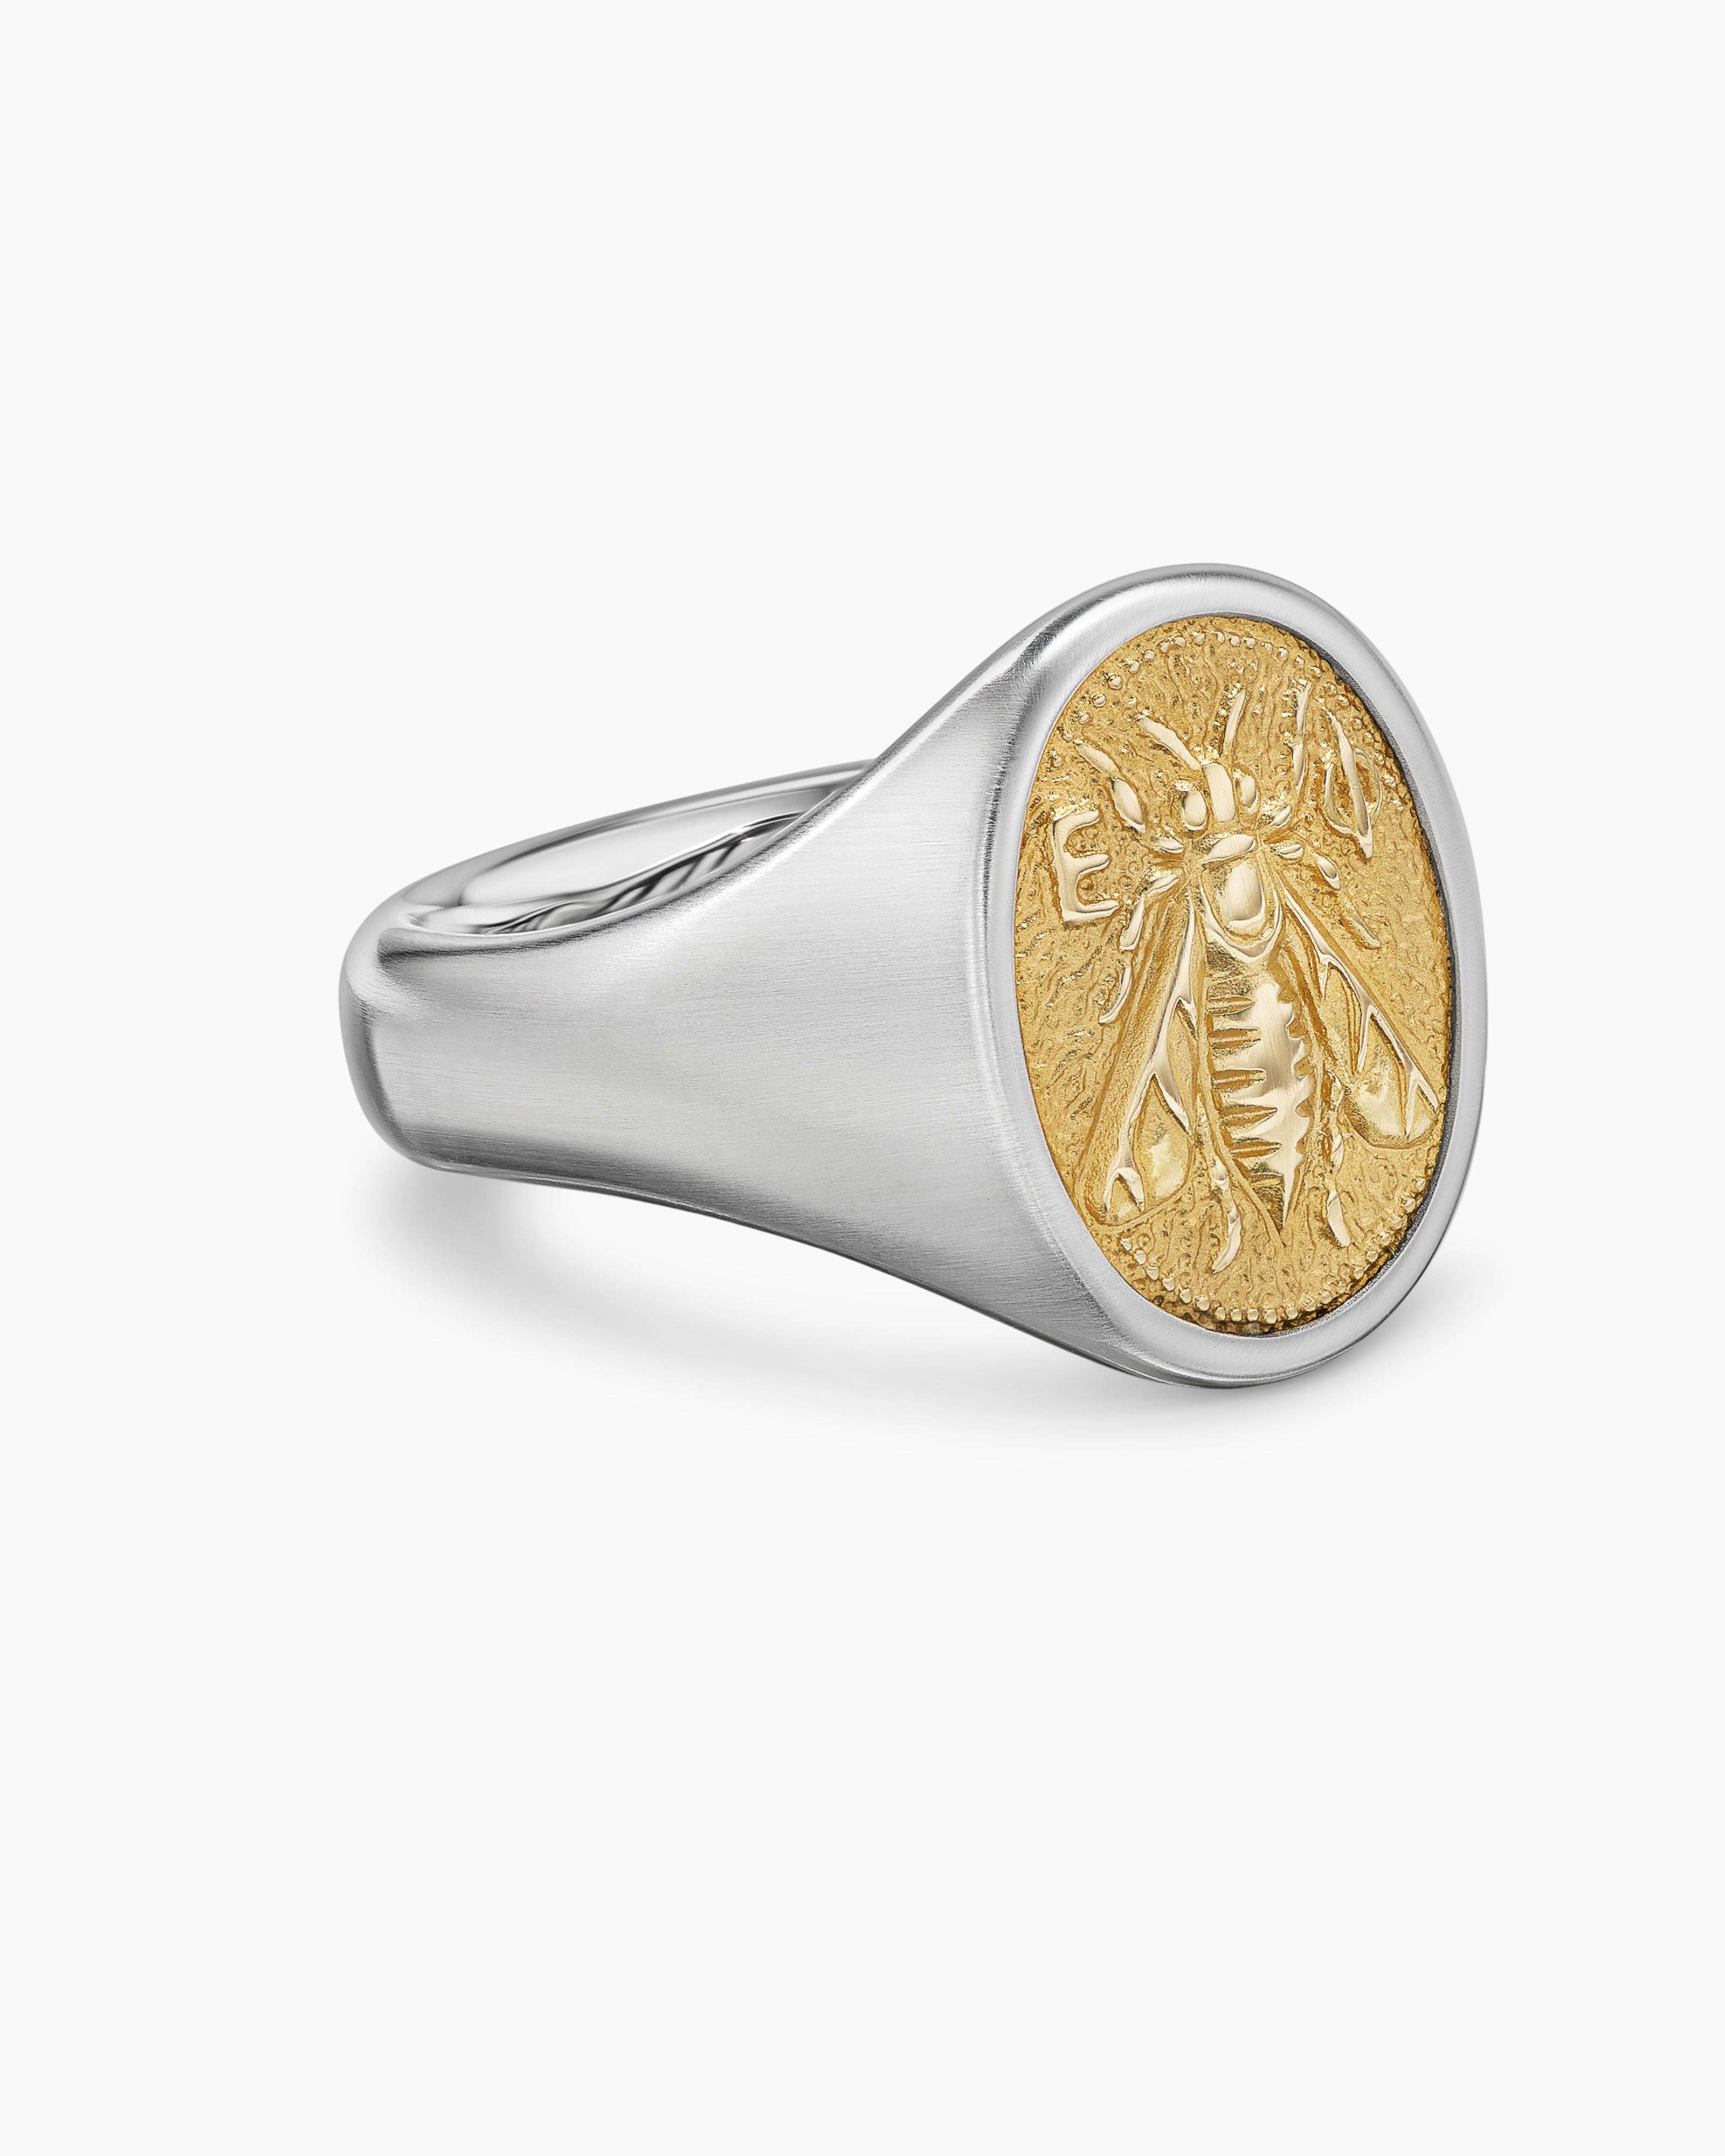 Petrvs Bee Pinky Ring in Sterling Silver with 18K Yellow Gold, 15.5